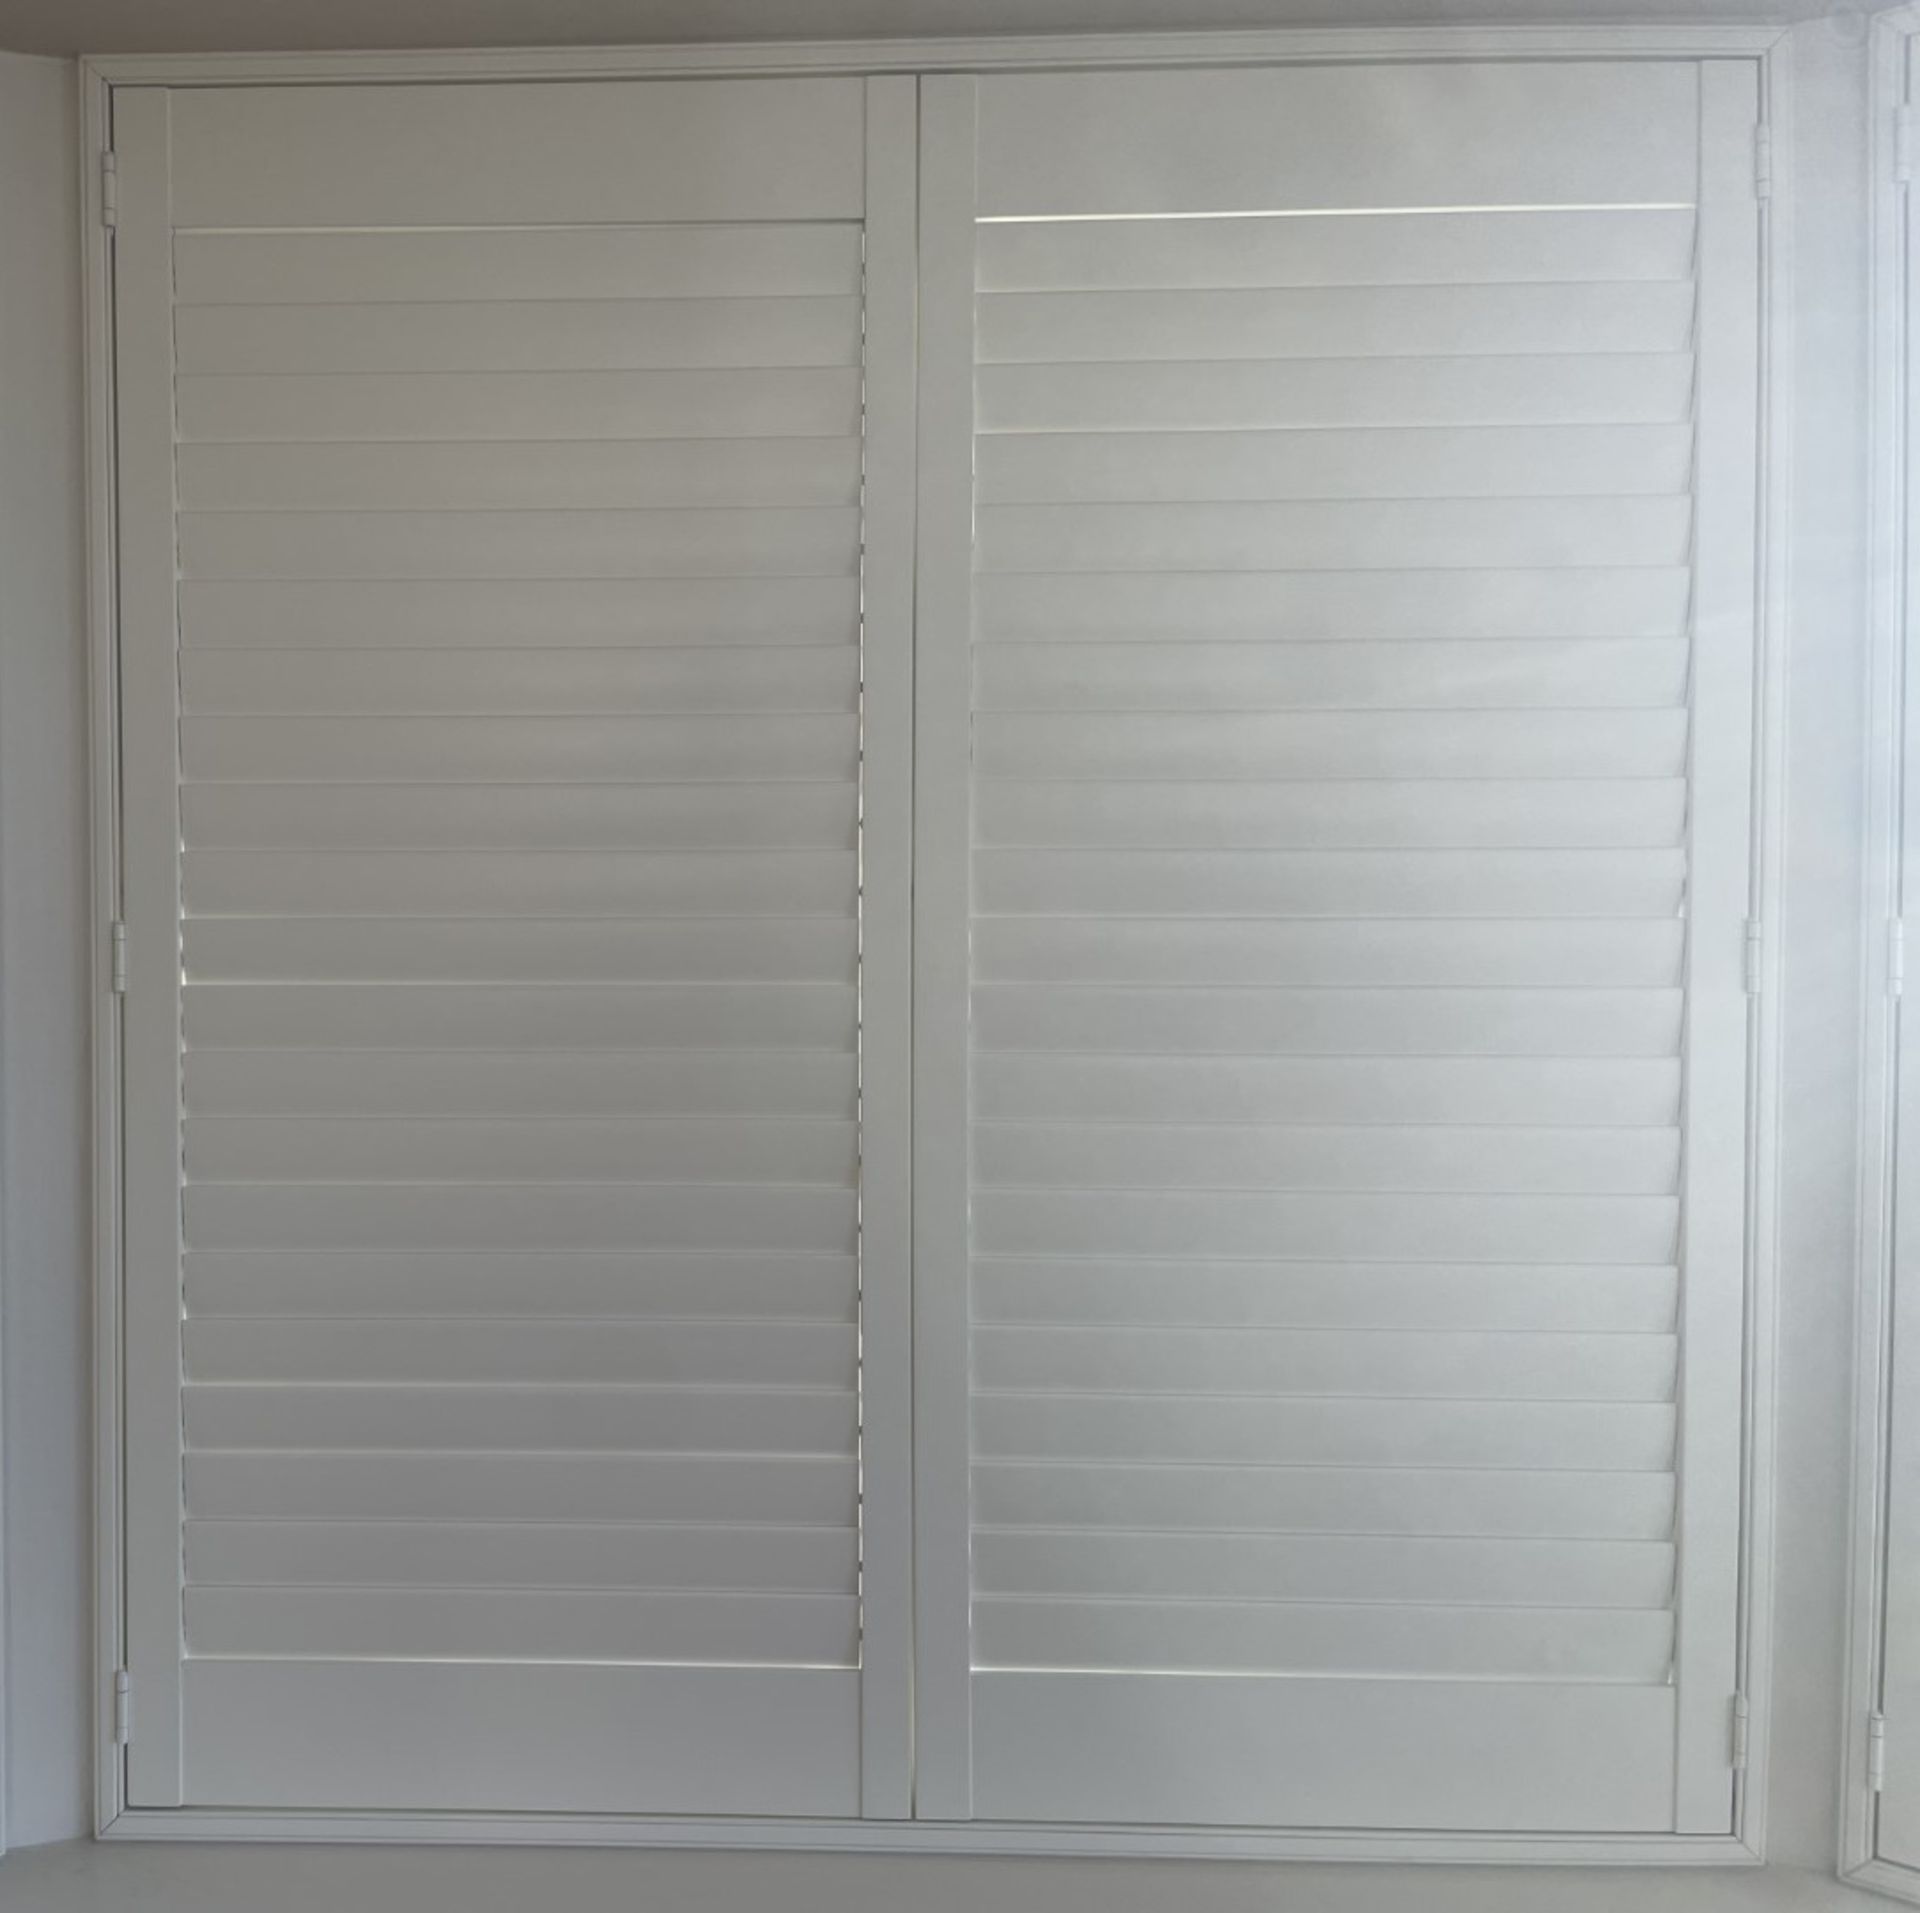 1 x Hardwood Timber Double Glazed Window Frames fitted with Shutter Blinds, In White - Ref: PAN101 - Image 3 of 23